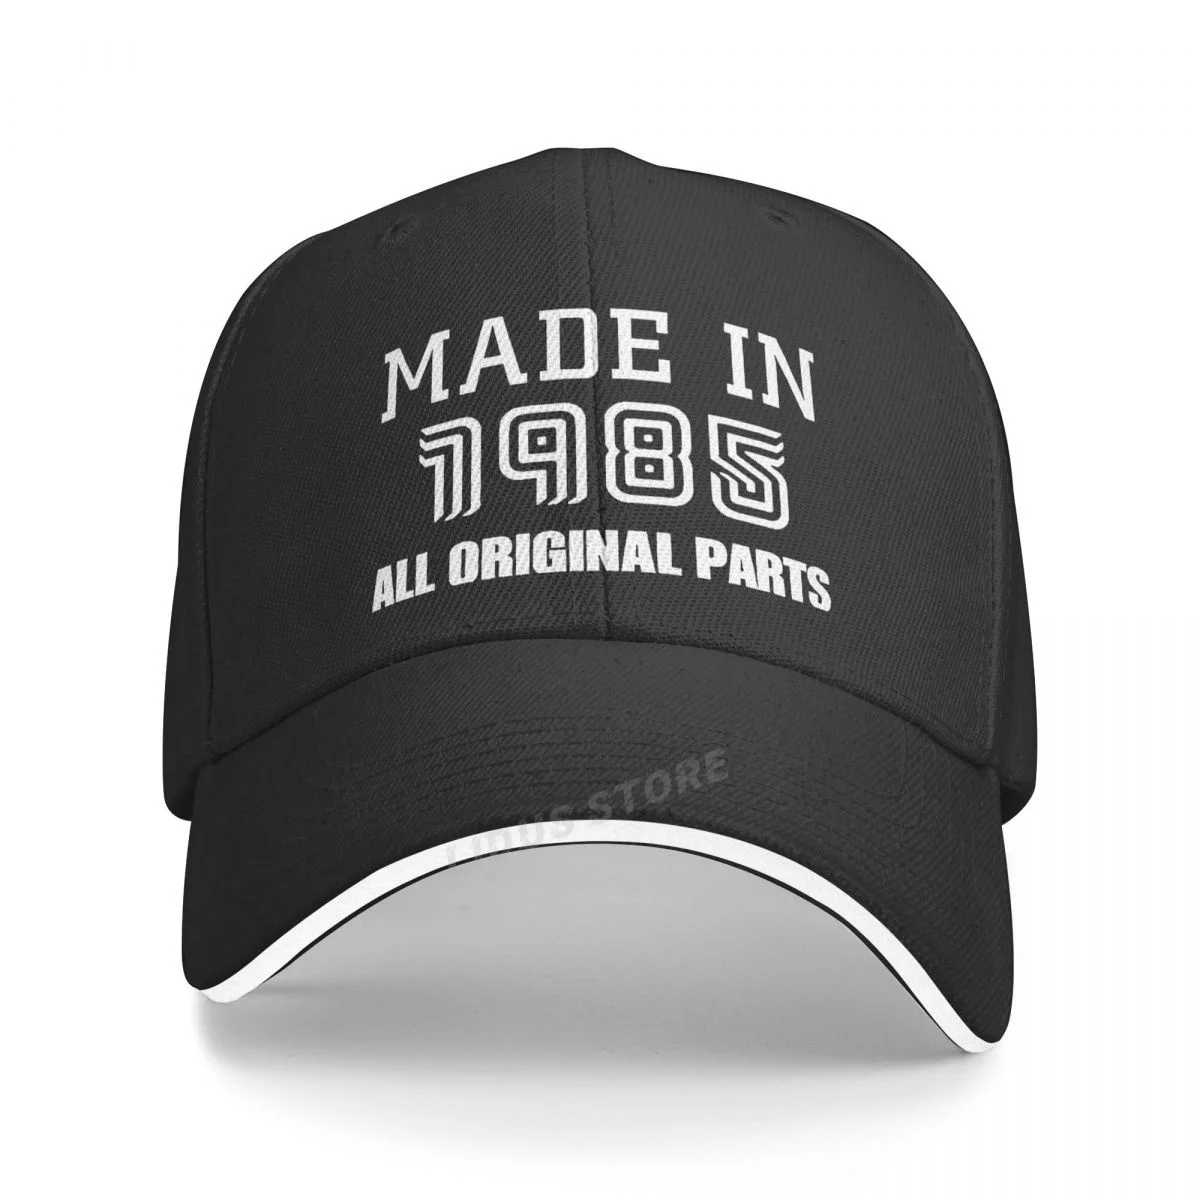 Made In 1985 Baseball Caps Adjustable Fashion Unisex Hats Cool Birthday Gift 1985 Cap